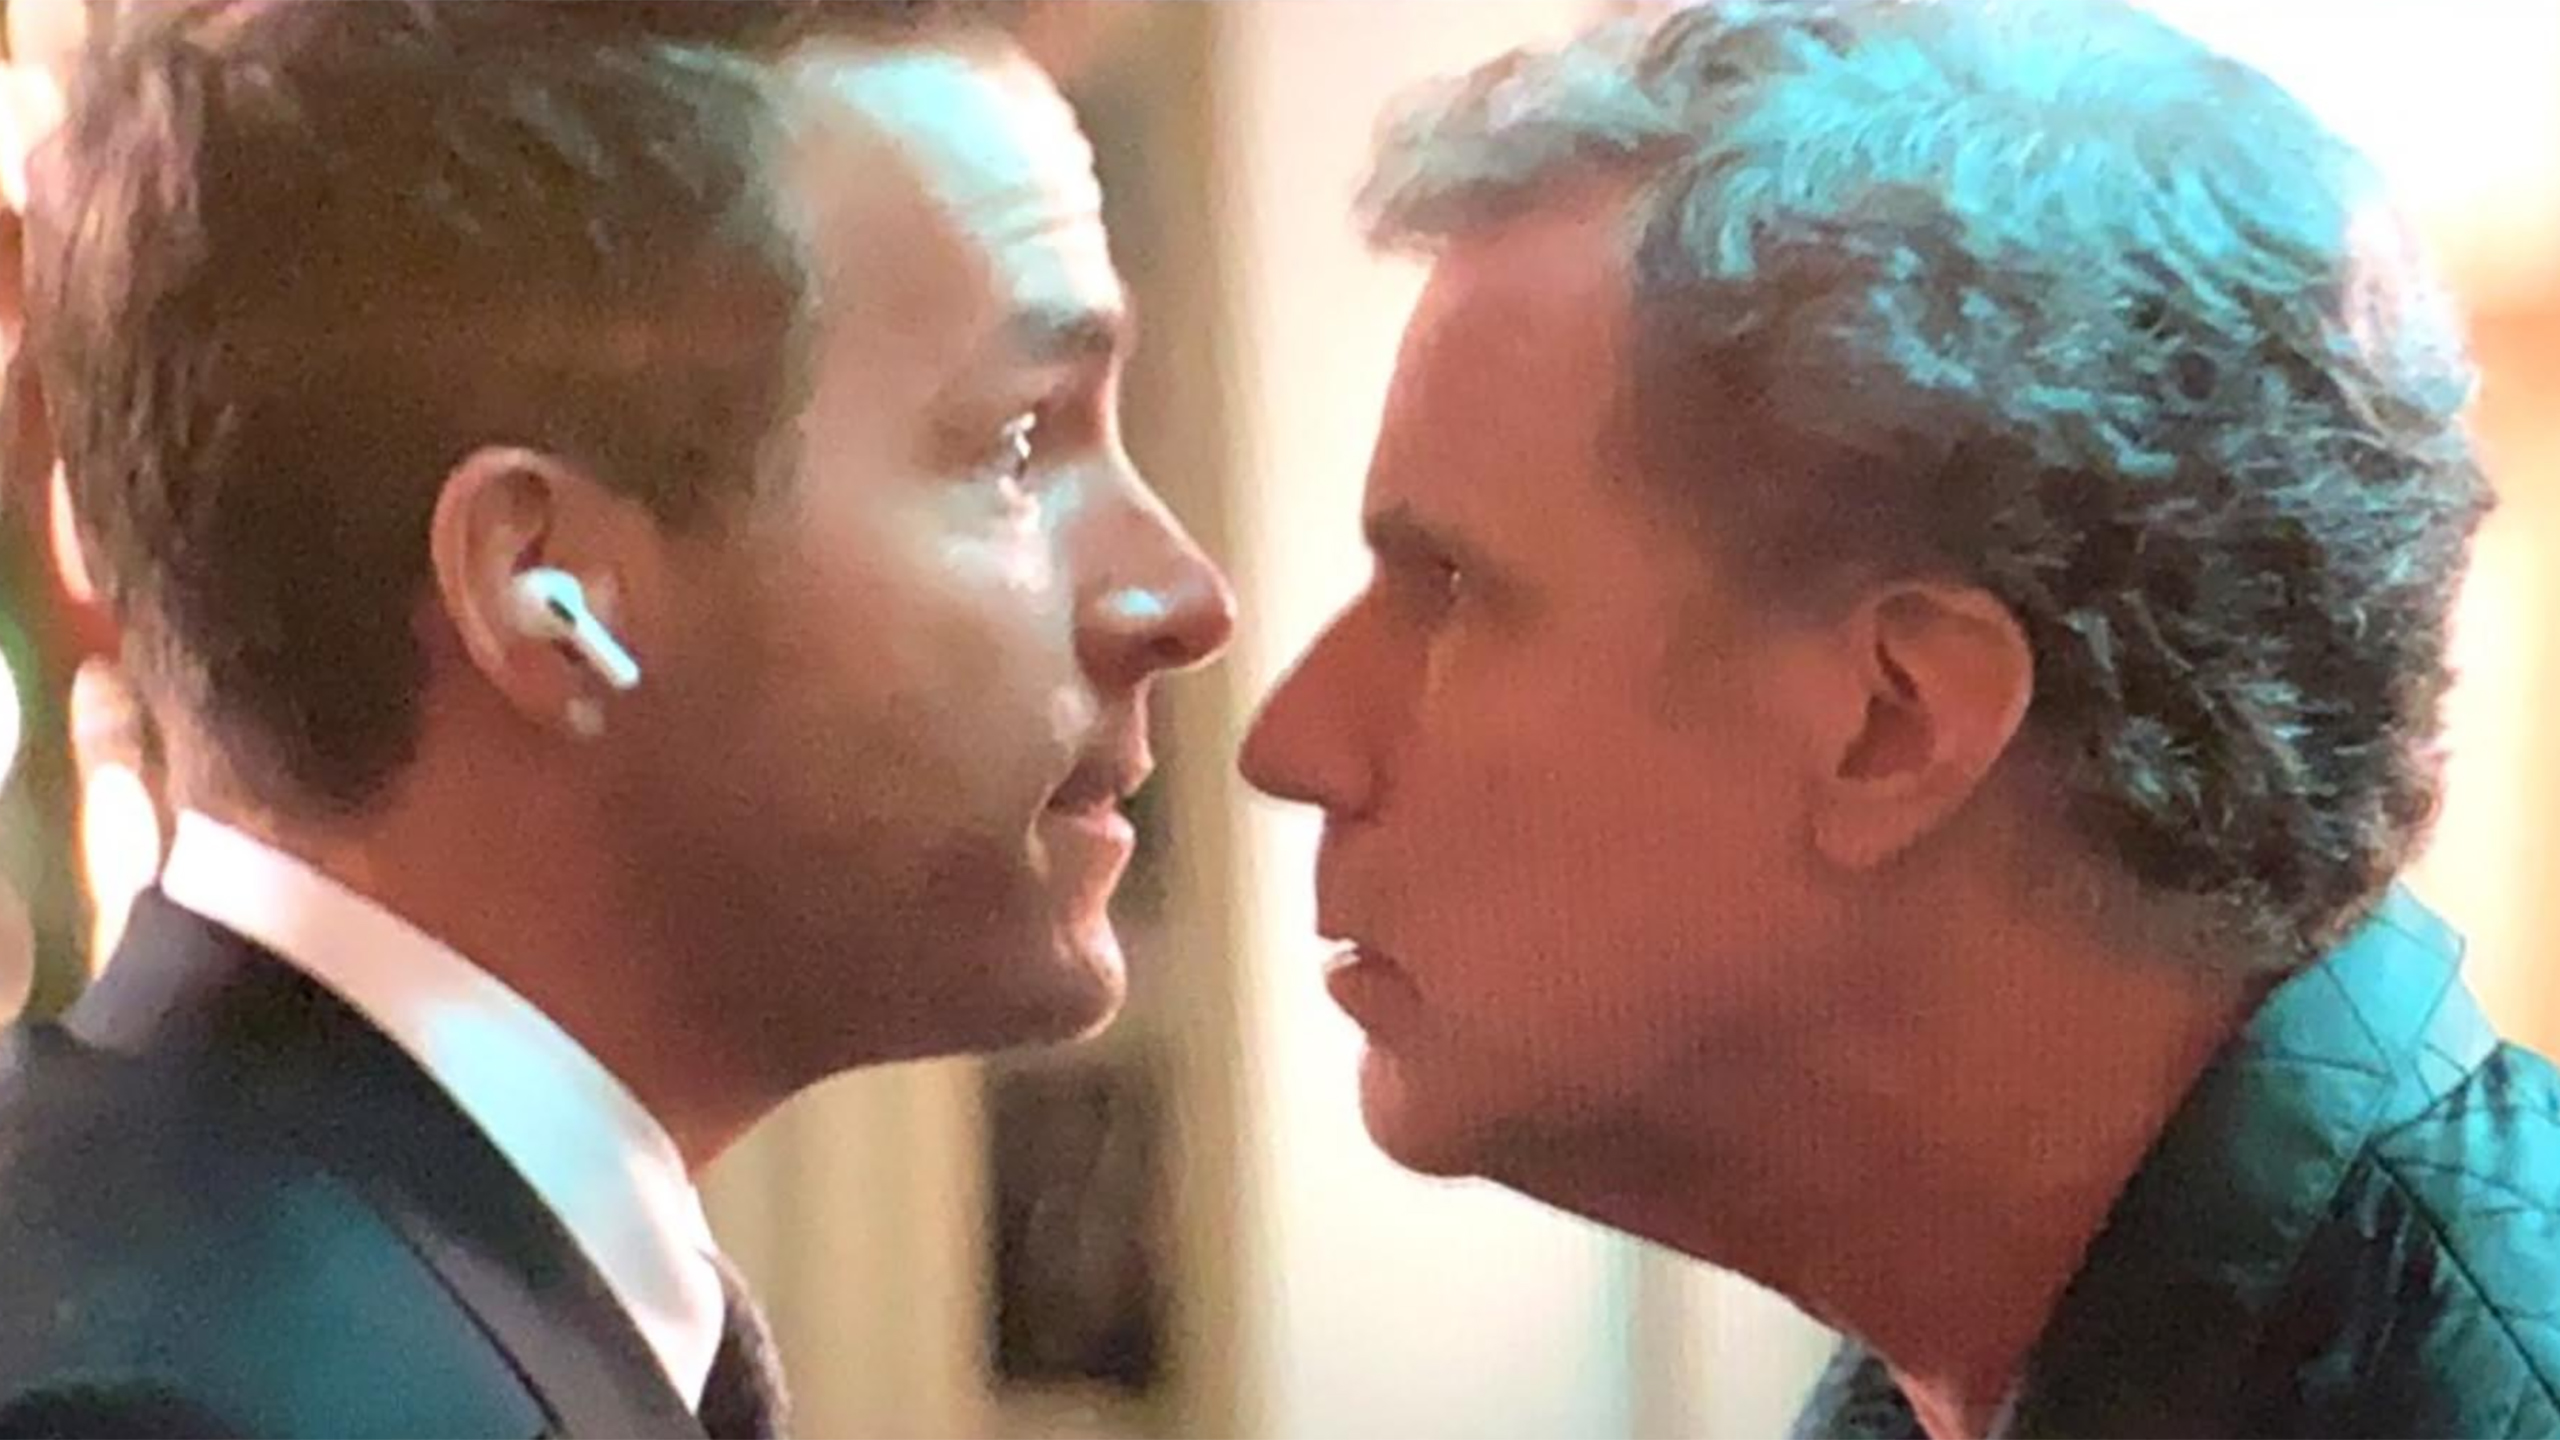 Will Ferrell's Ghost of Christmas Present Takes Ryan Reynolds on a Musical  Journey in 'Spirited' Teaser - Metacritic